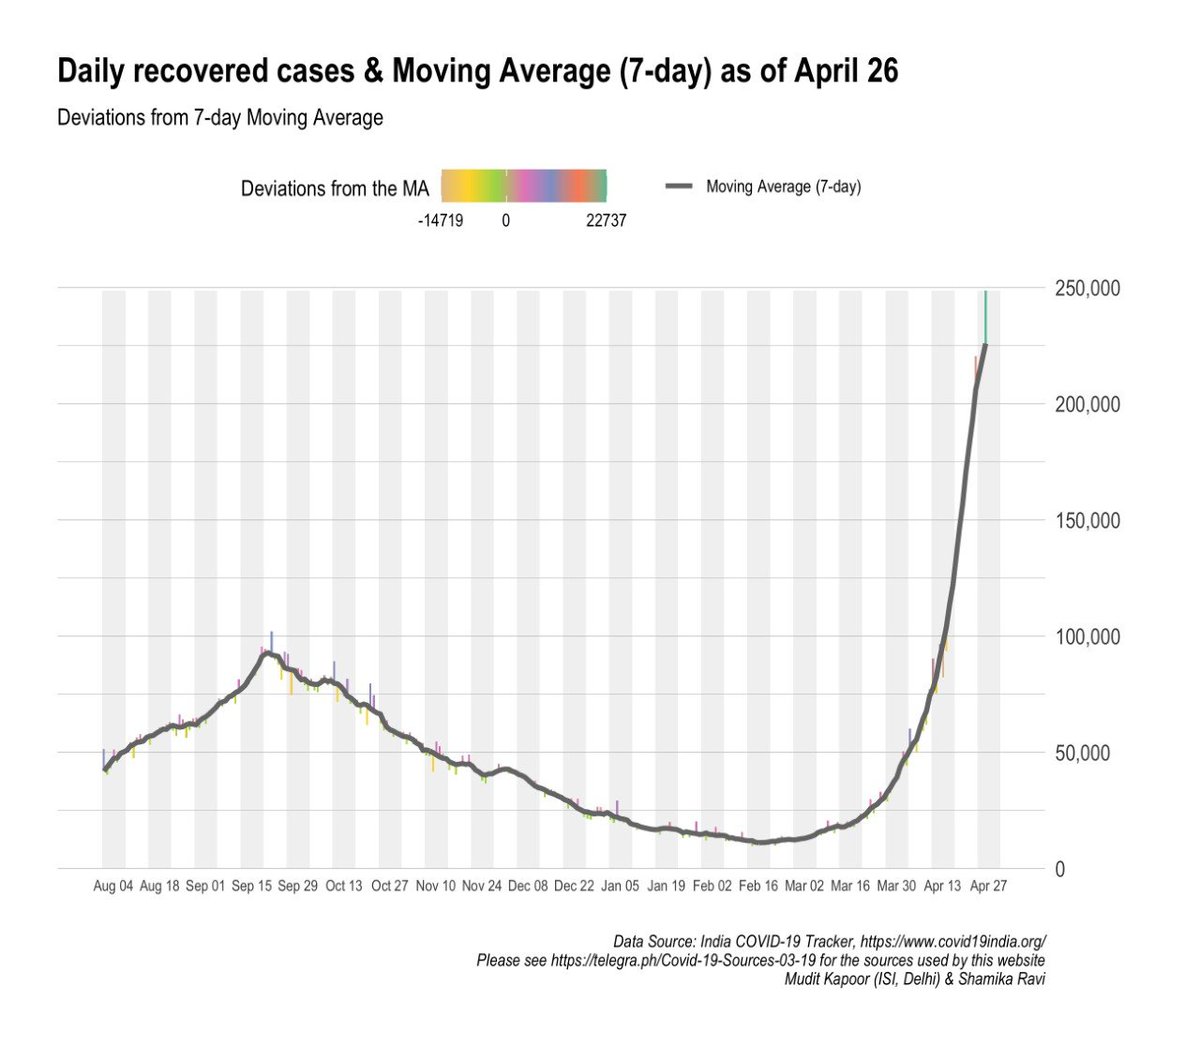 While we only focus on daily new cases (through new media etc.), it is important to monitor daily recovered cases too & deaths - to get a better sense of what is the net burden on the healthcare infrastructure. That is why we put so much emphasis on active cases.